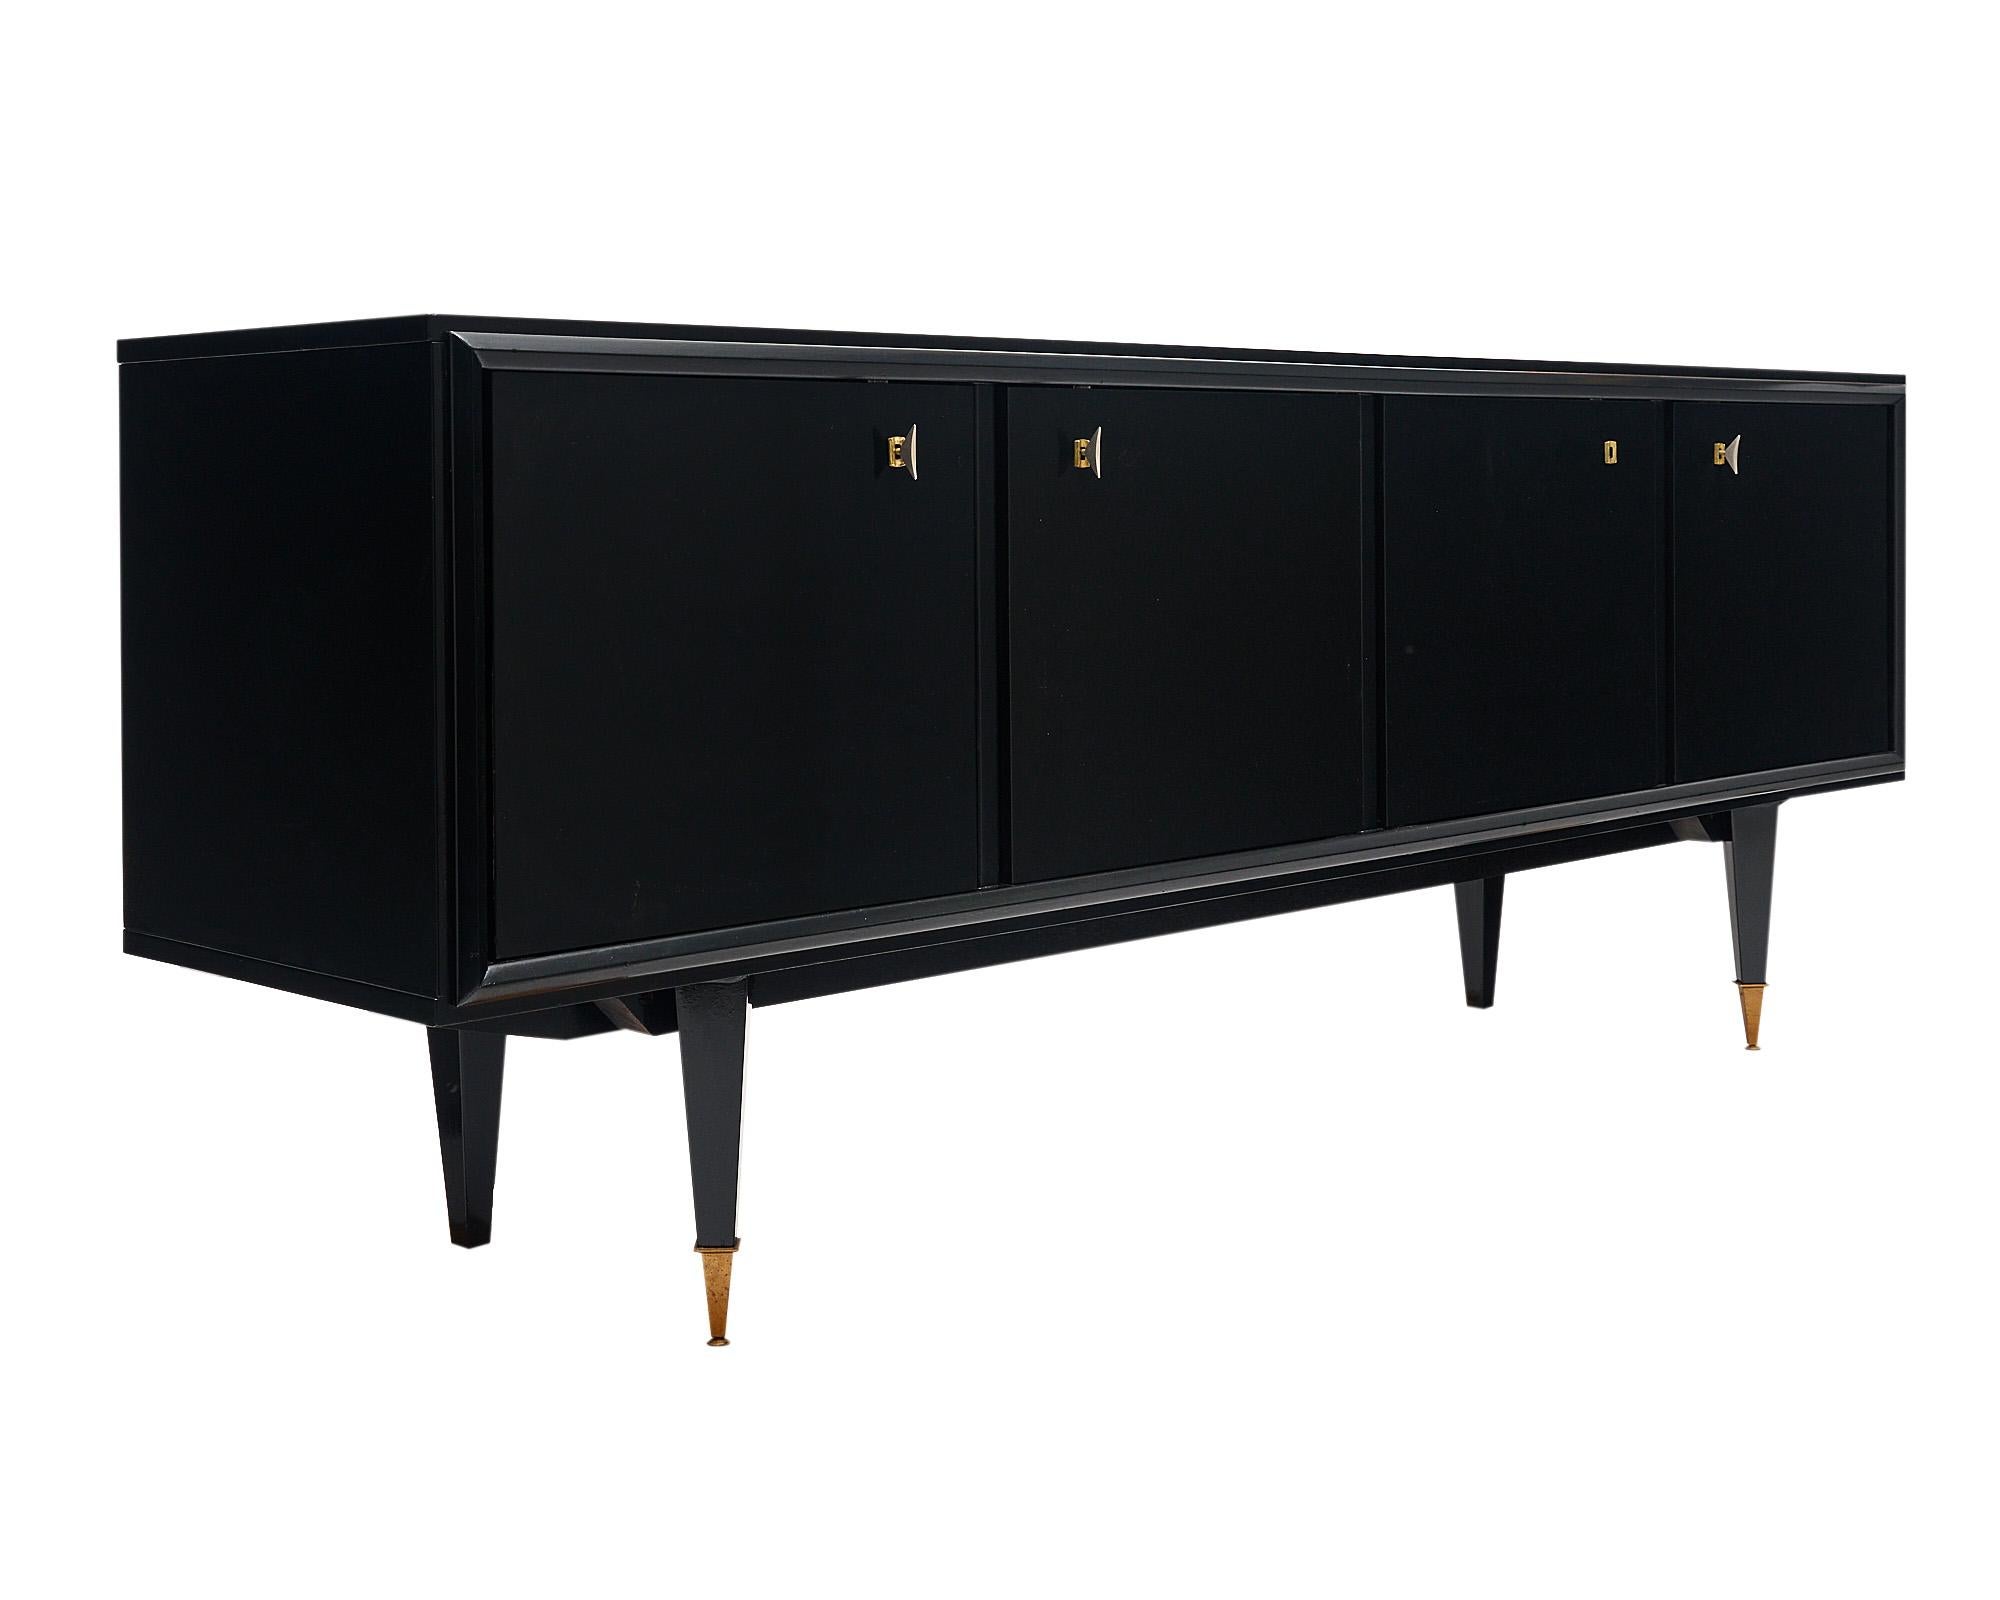 Buffet from the mid-century in France featuring tapered; geometric legs capped in brass and four doors with working keys and locks. The left most door opens to reveal a glass shelf and drawer; while the other doors reveal lemon wood interiors and